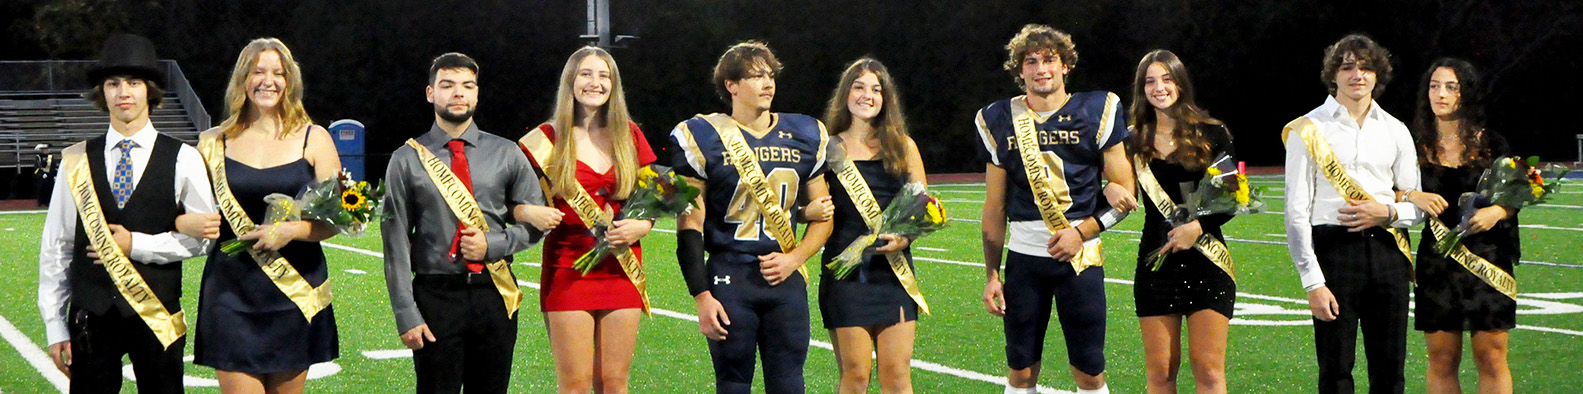 Homecoming Court on the football field